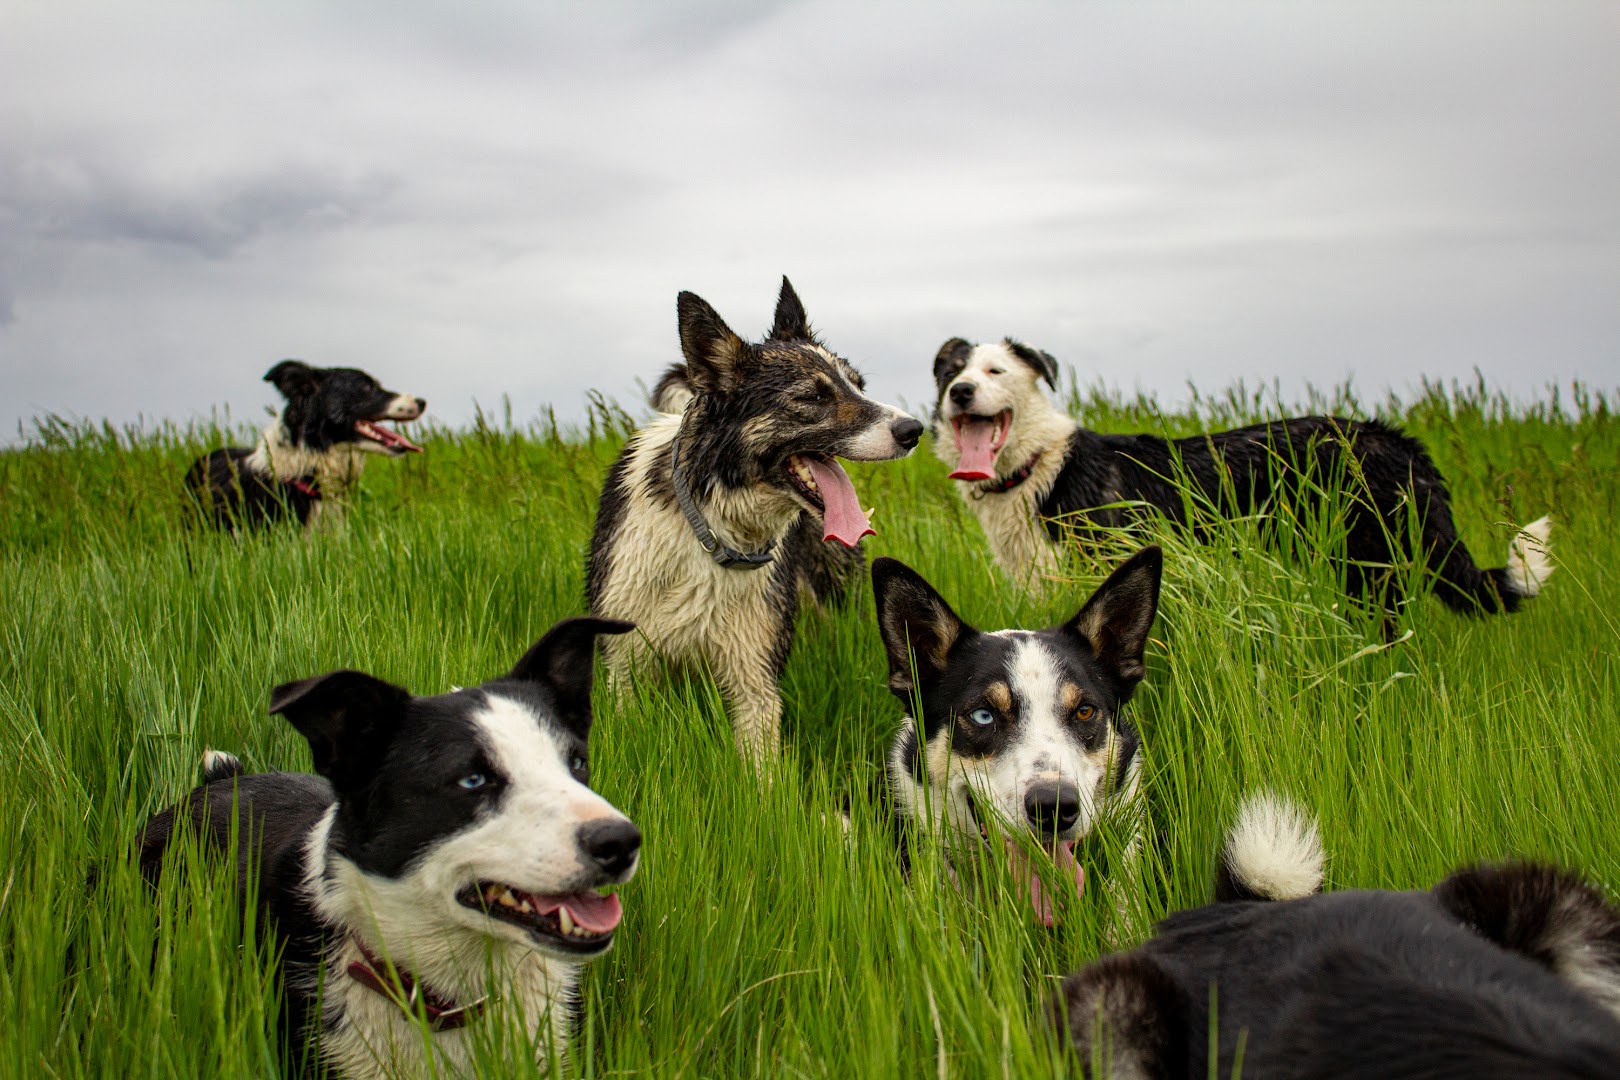 The Canine Training Group